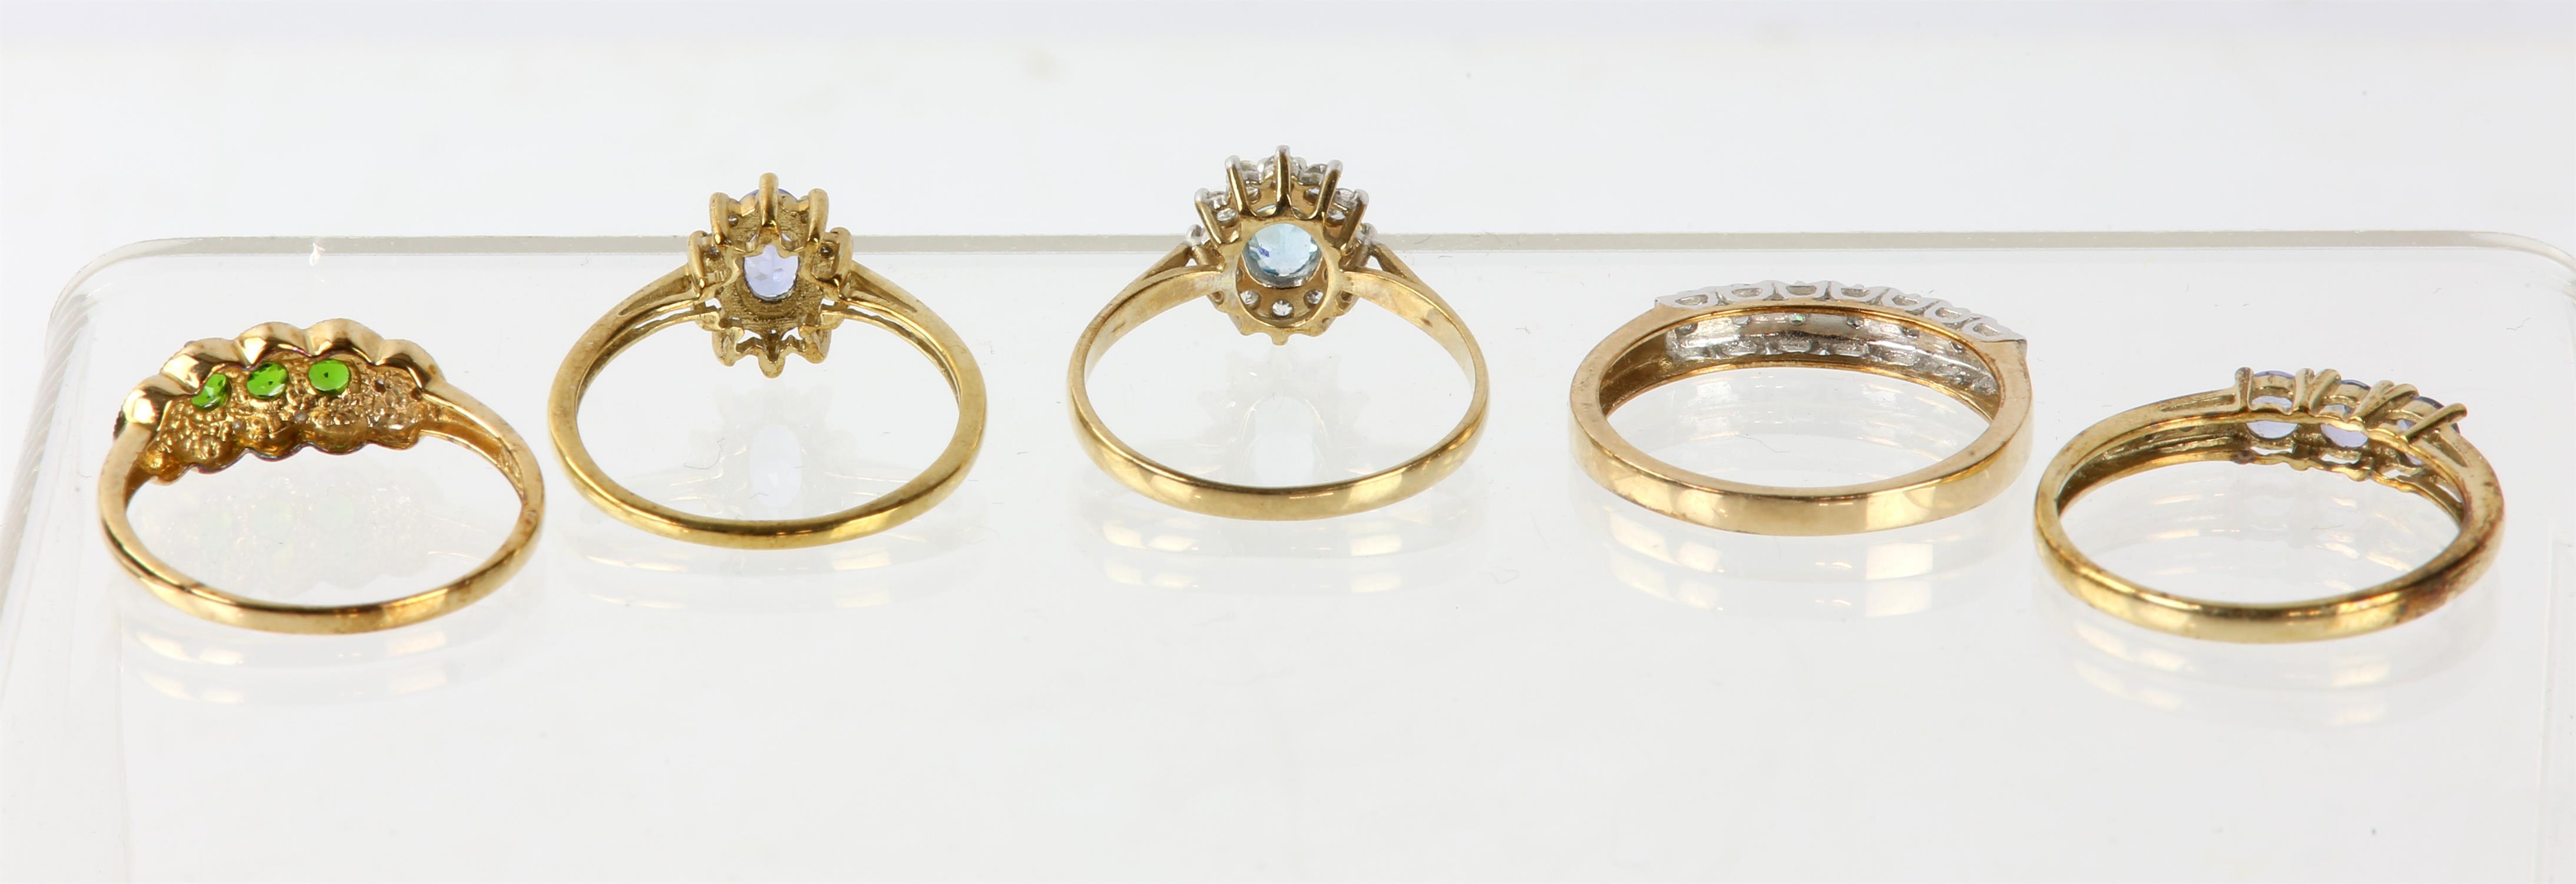 Five dress rings, including a blue topaz cluster ring set with an oval blue topaz and a surround of - Image 2 of 3